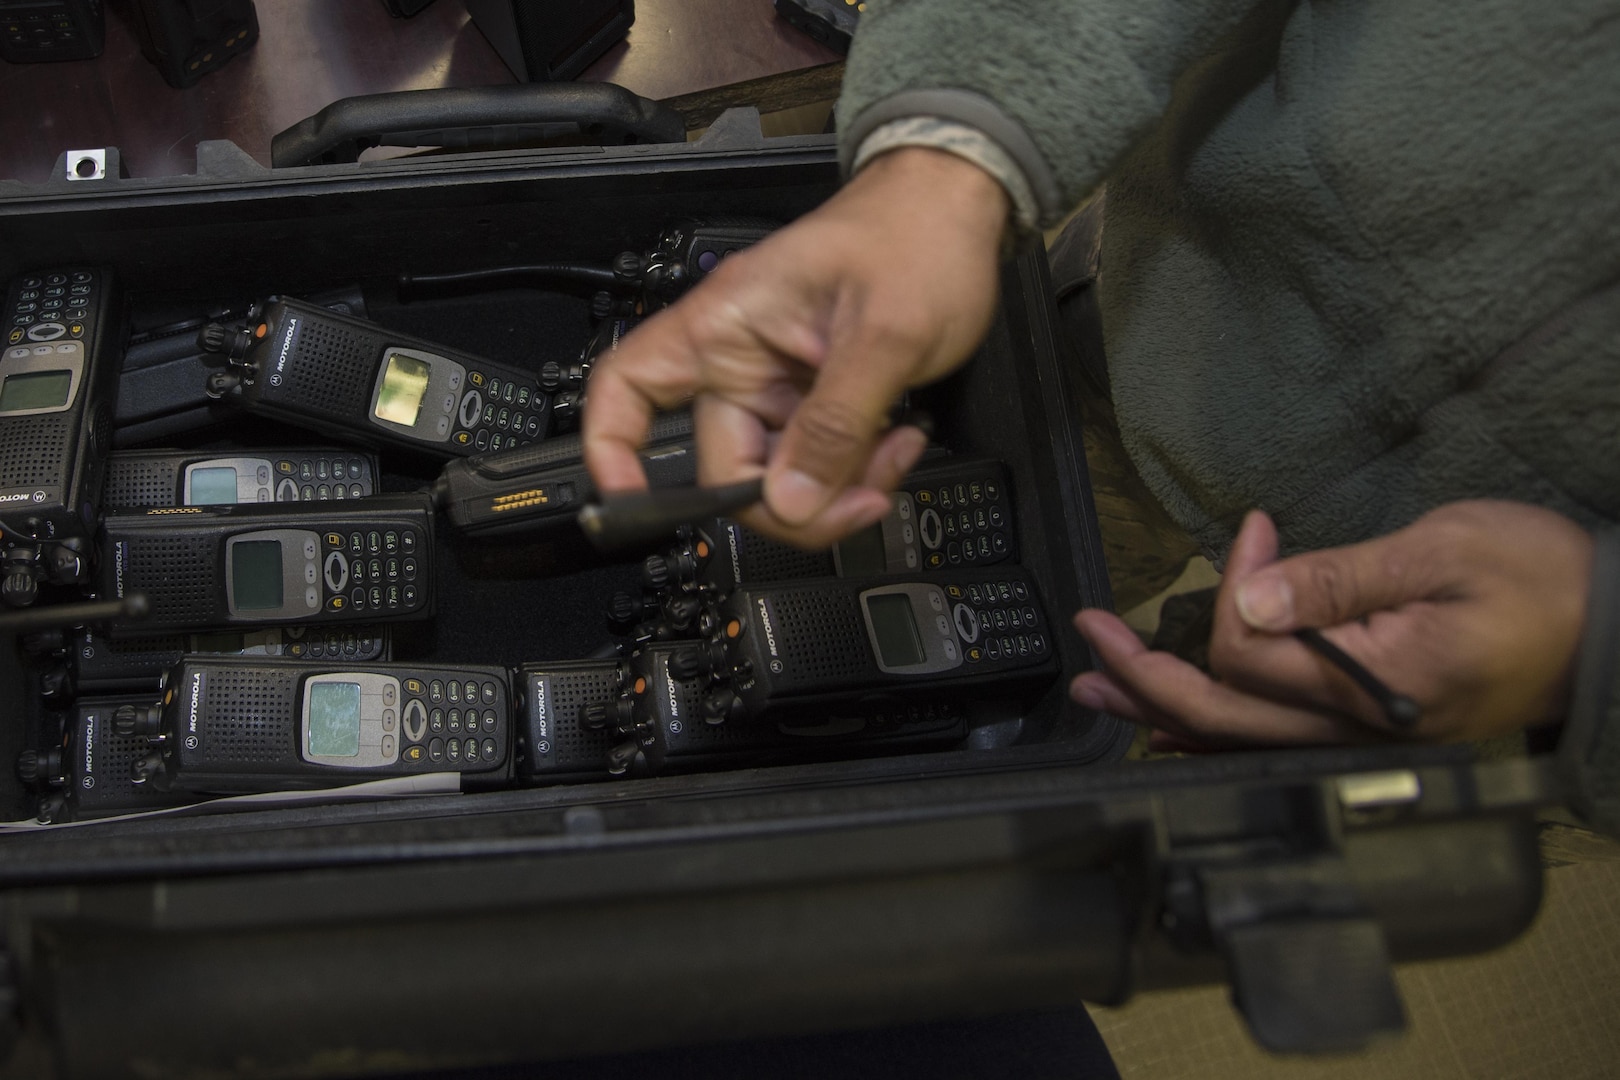 A 744th Communications Squadron radio frequency transmission system technician prepares land mobile radios for pick up on Joint Base Andrews, Md., Jan. 11, 2017. The 744th CS plays an important role in ensuring communication is running smoothly. Airmen participating in the 58th Presidential Inauguration will be using approximately 200 LMRs provided by the 744th CS.  (U.S. Air Force photo by Airman 1st Class Valentina Lopez)